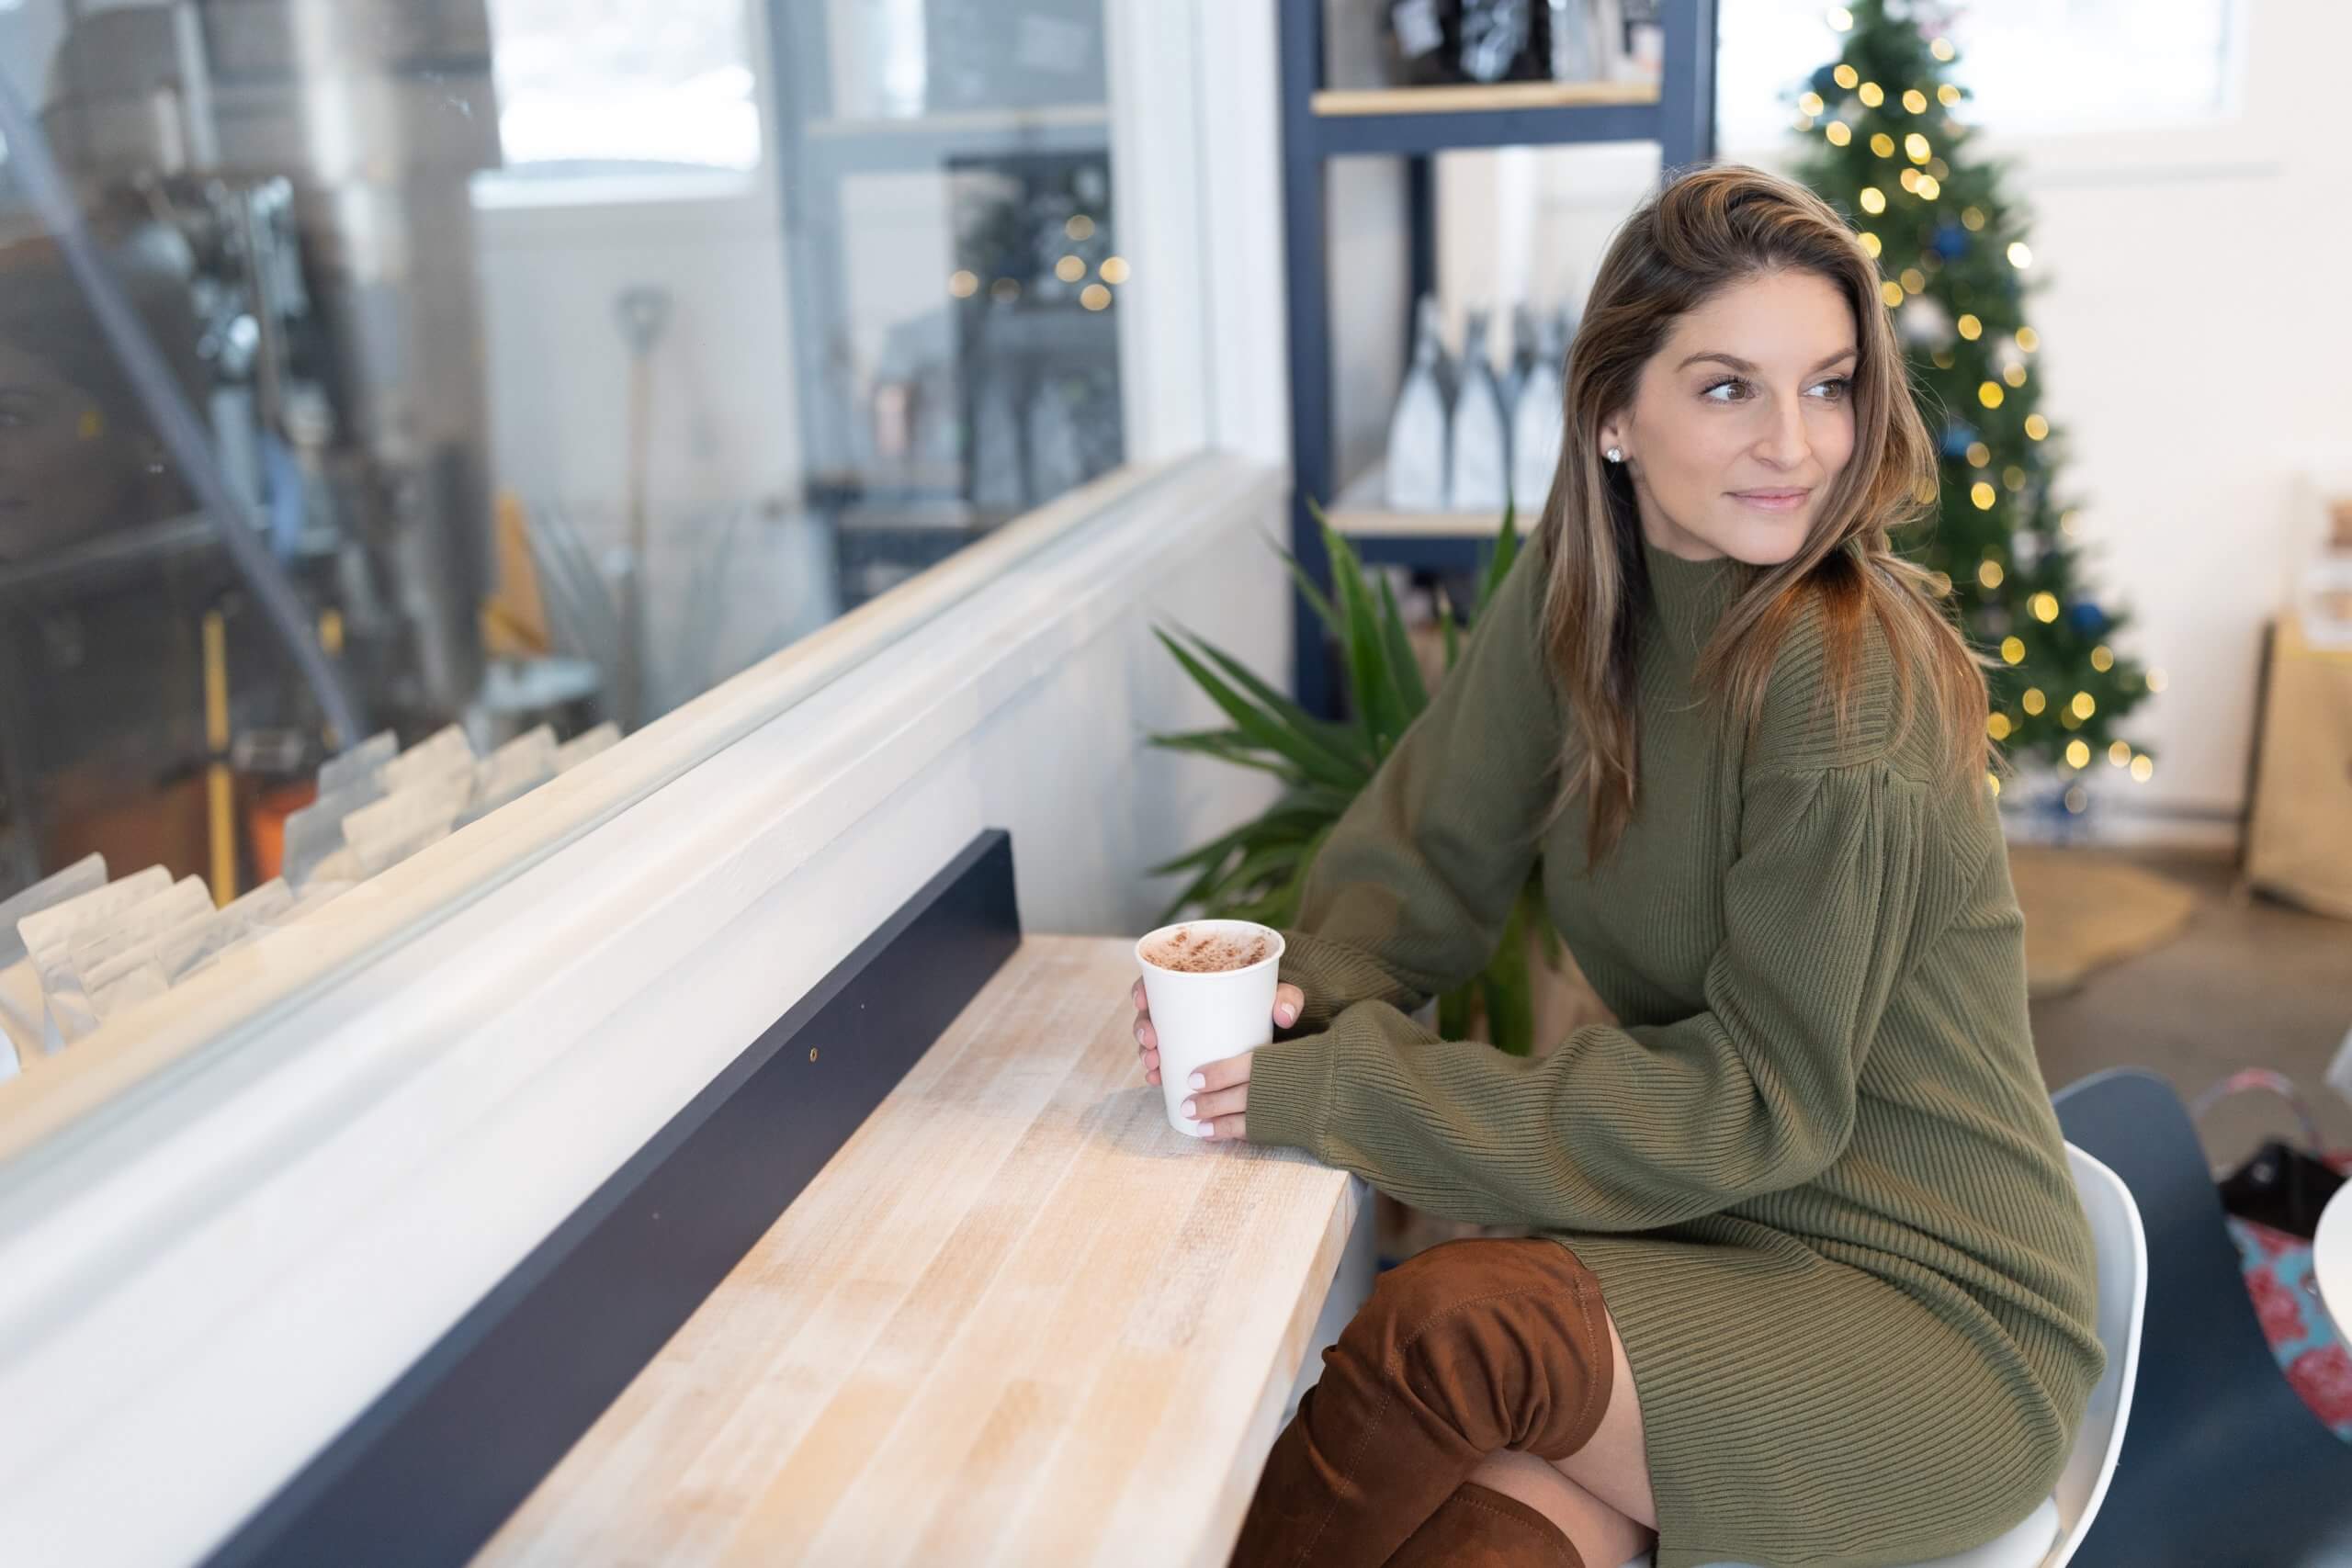 
Lantern Sleeve Round Neck Ribbed Sweater Dress in Army Green - Retro, Indie and Unique Fashion
LANTERN SLEEVE ROUND NECK RIBBED SWEATER DRESS IN ARMY GREEN chicwish; winter cozy sweater; winter style; jacked up coffee whitby; durham region blogger mandy furnis